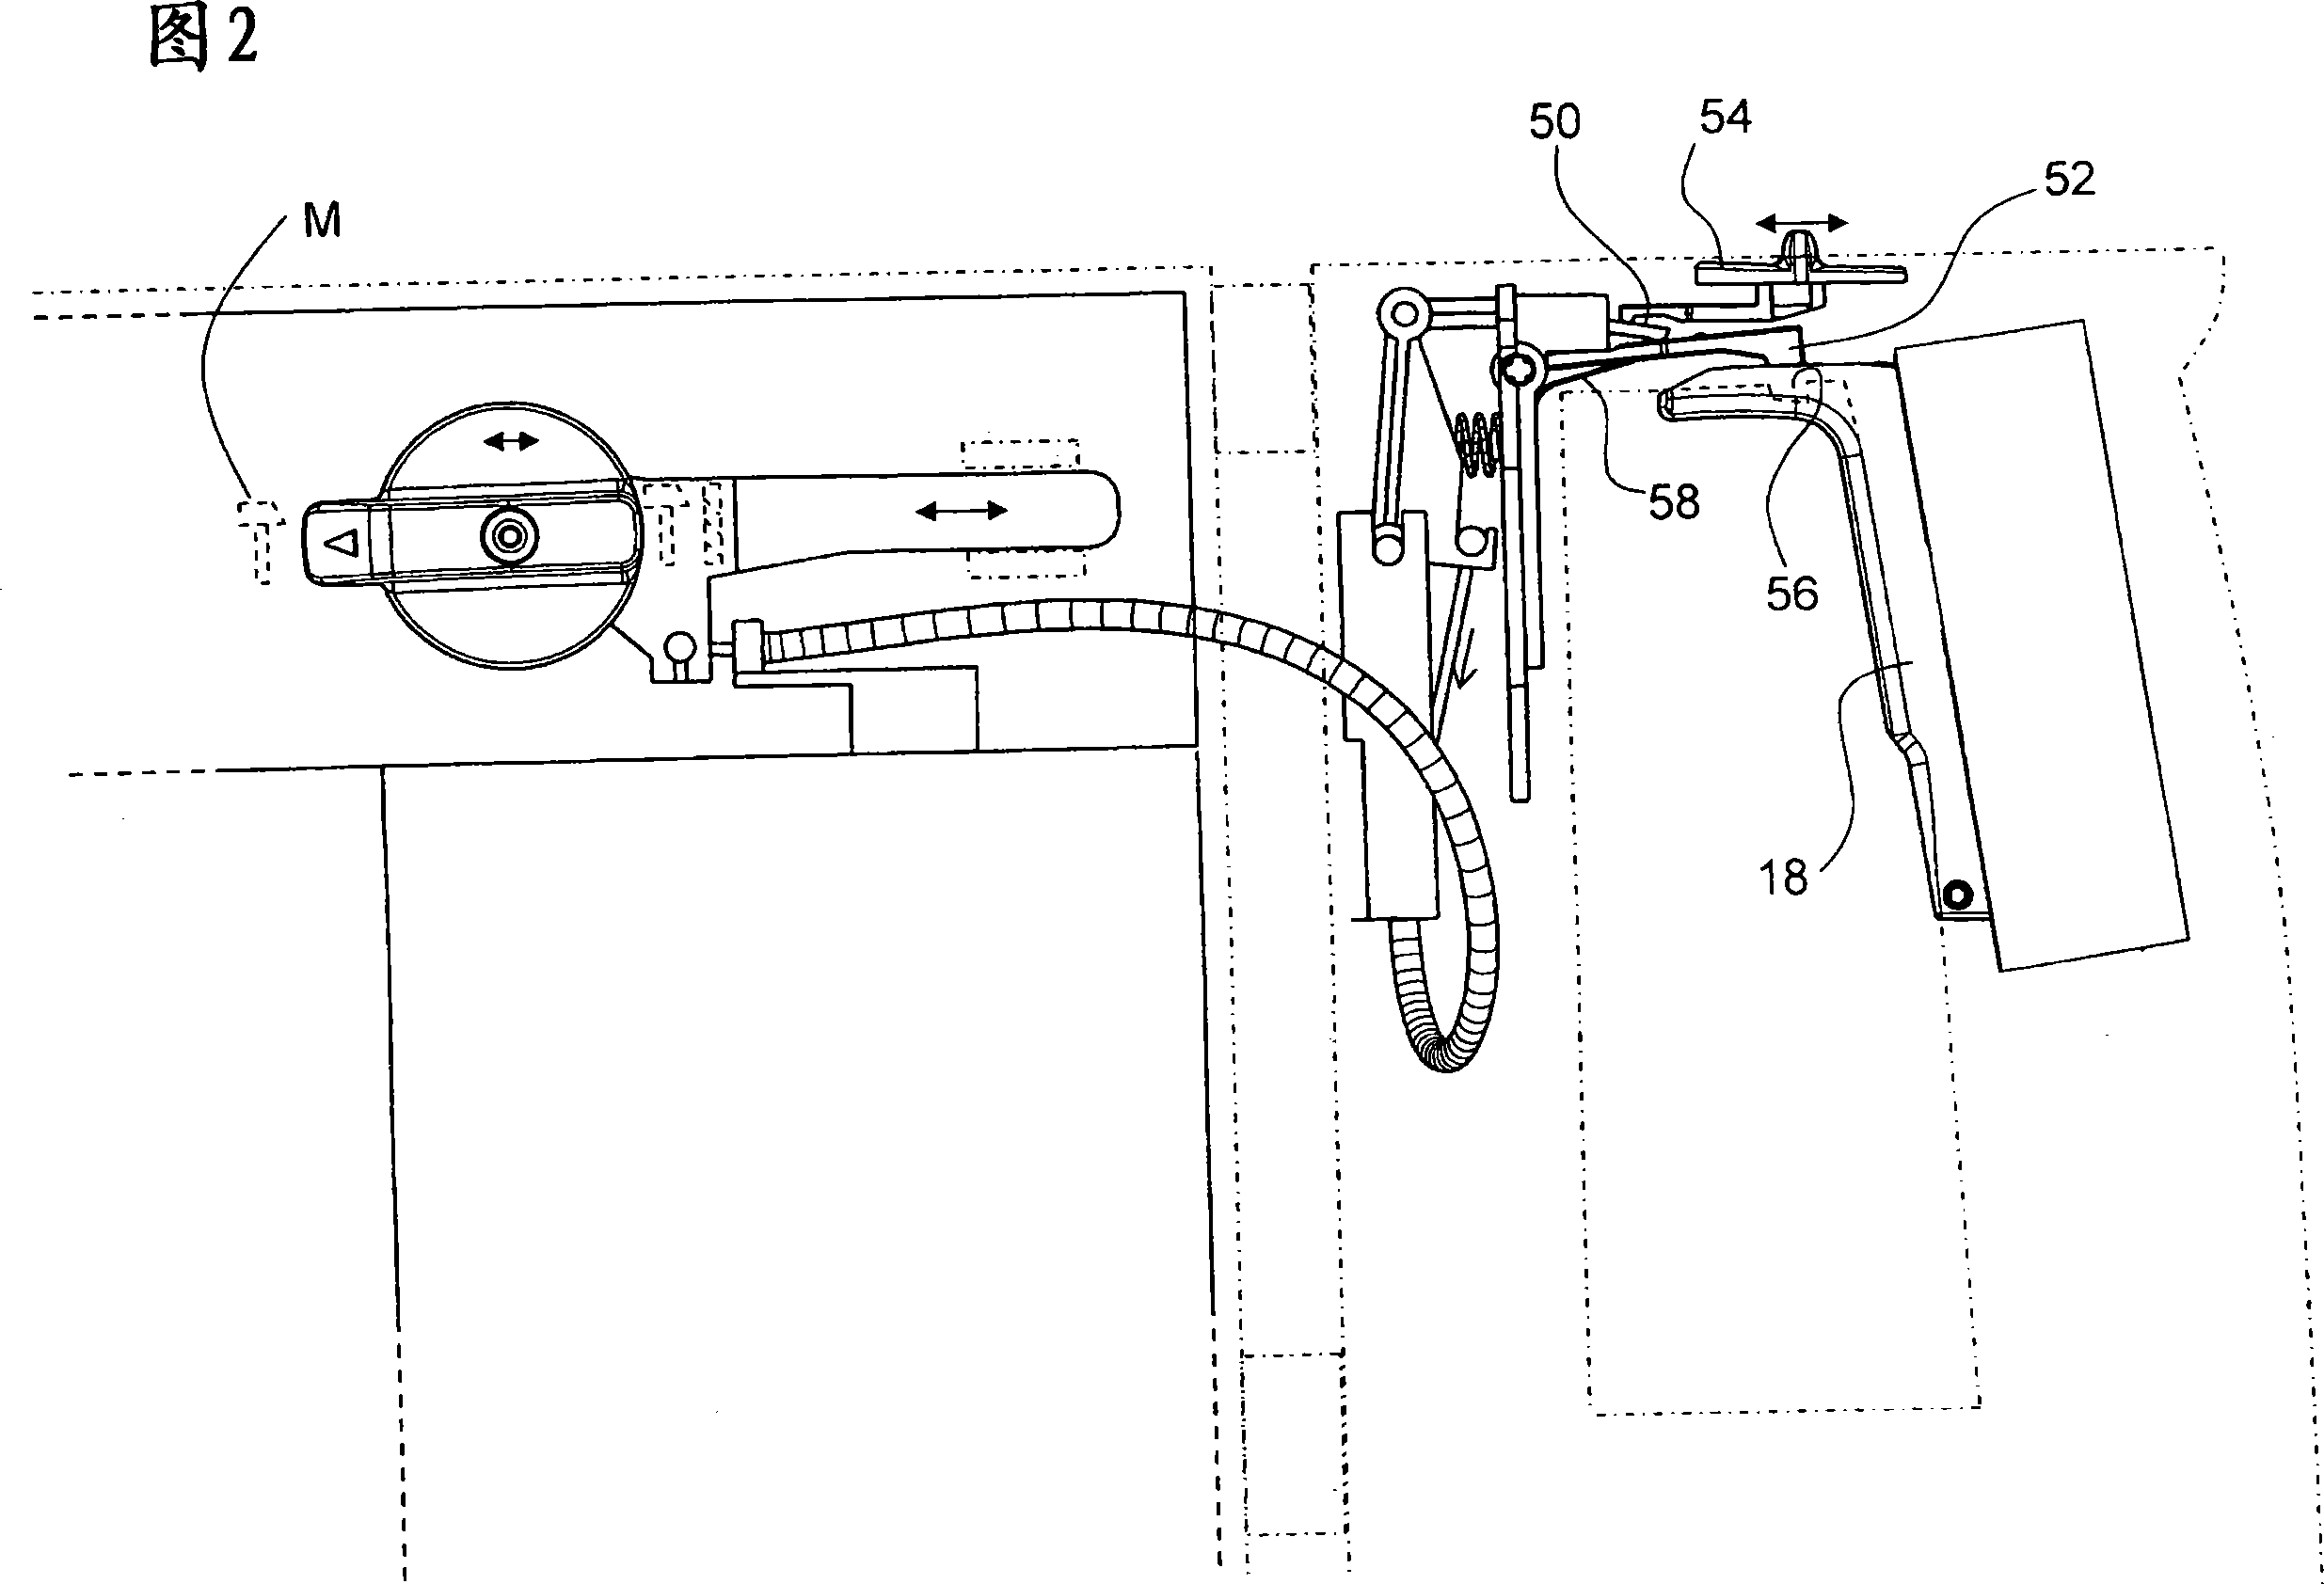 Manual tool with vibration reduction device